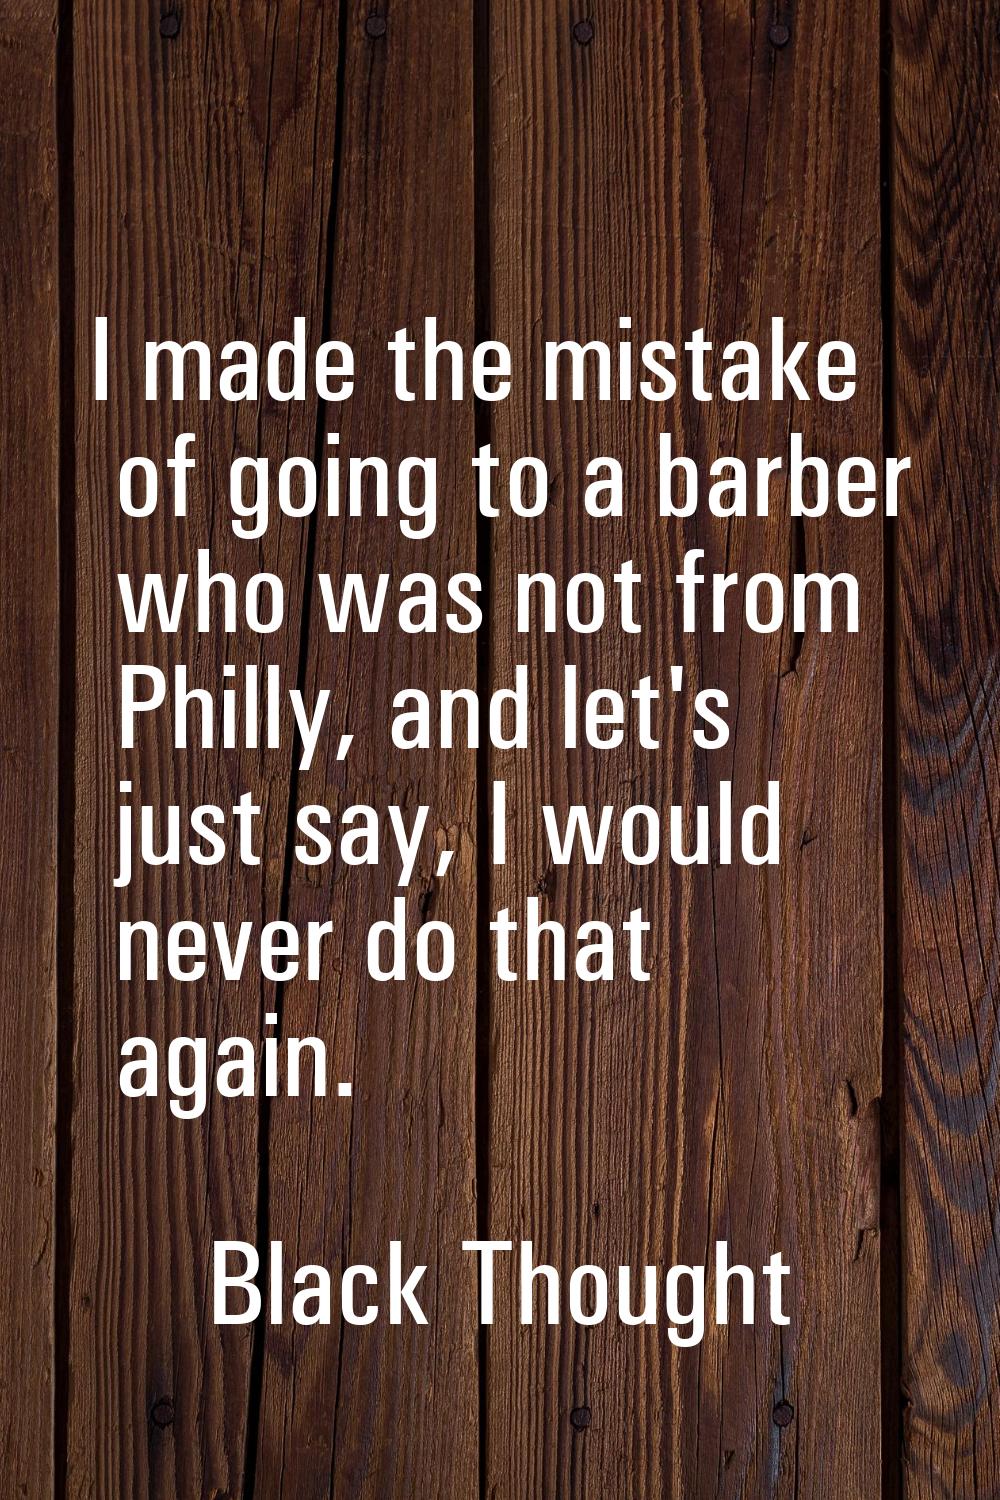 I made the mistake of going to a barber who was not from Philly, and let's just say, I would never 